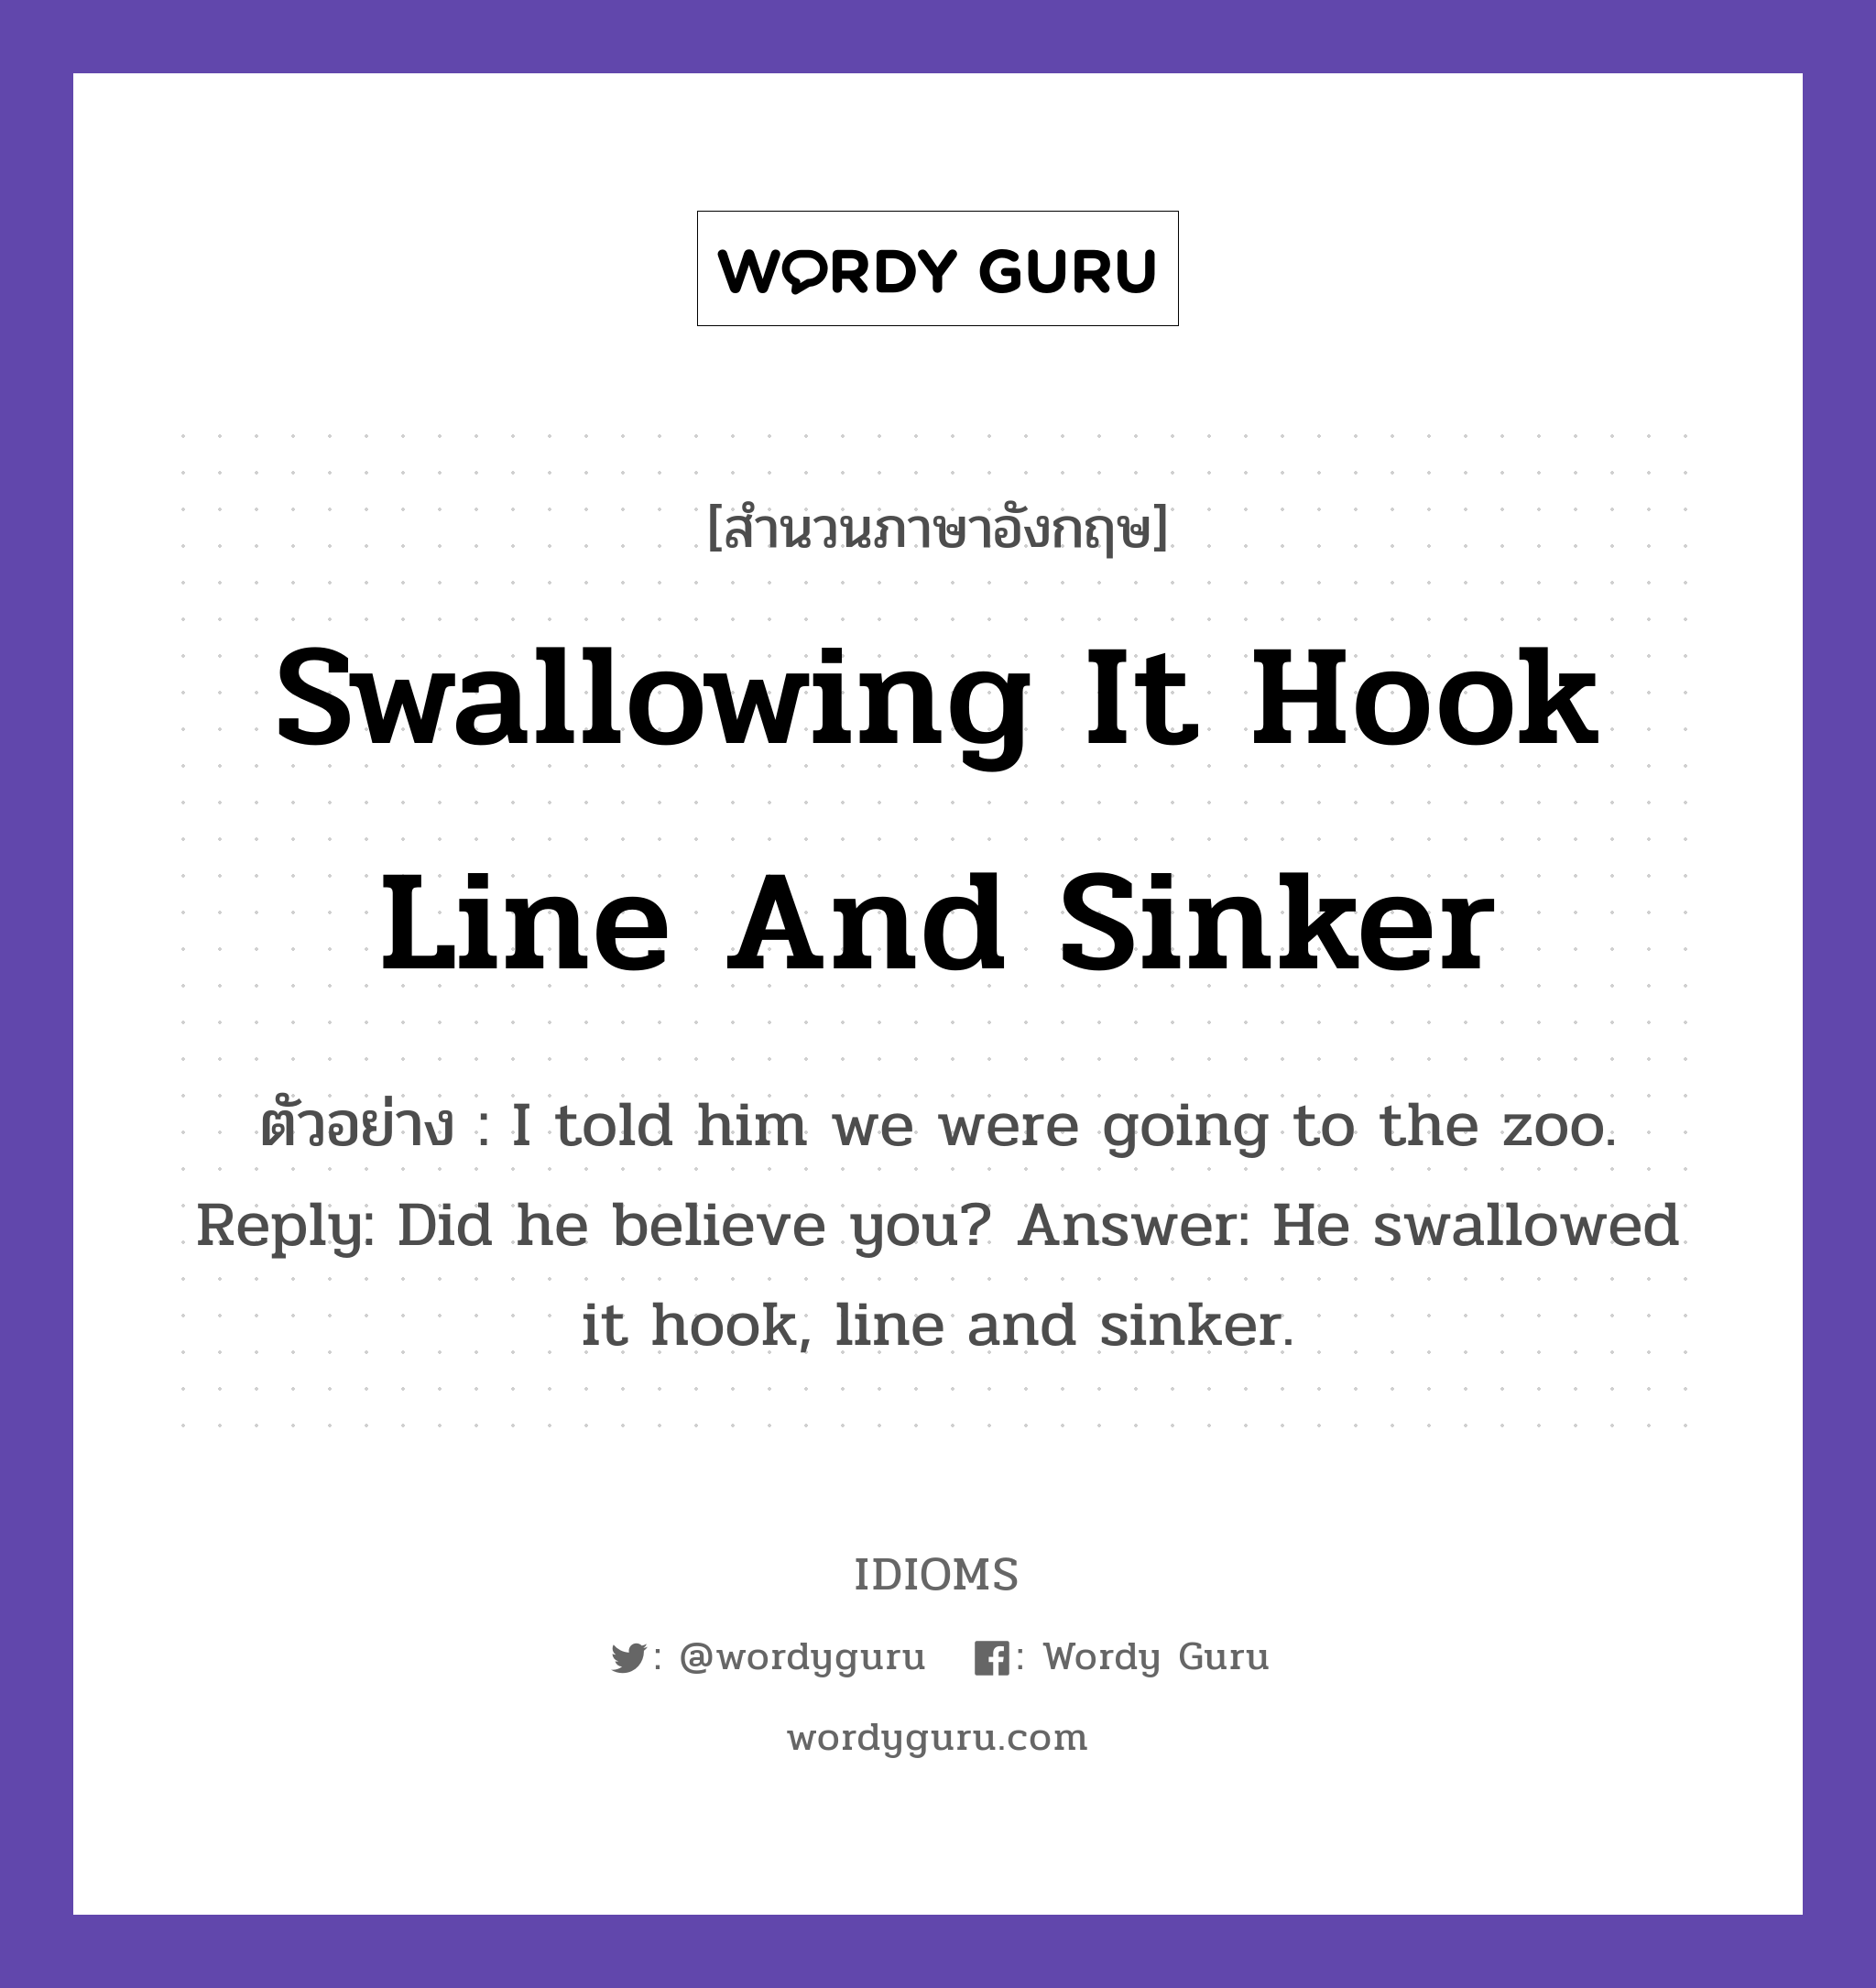 Swallowing It Hook Line And Sinker แปลว่า?, สำนวนภาษาอังกฤษ Swallowing It Hook Line And Sinker ตัวอย่าง I told him we were going to the zoo. Reply: Did he believe you? Answer: He swallowed it hook, line and sinker.